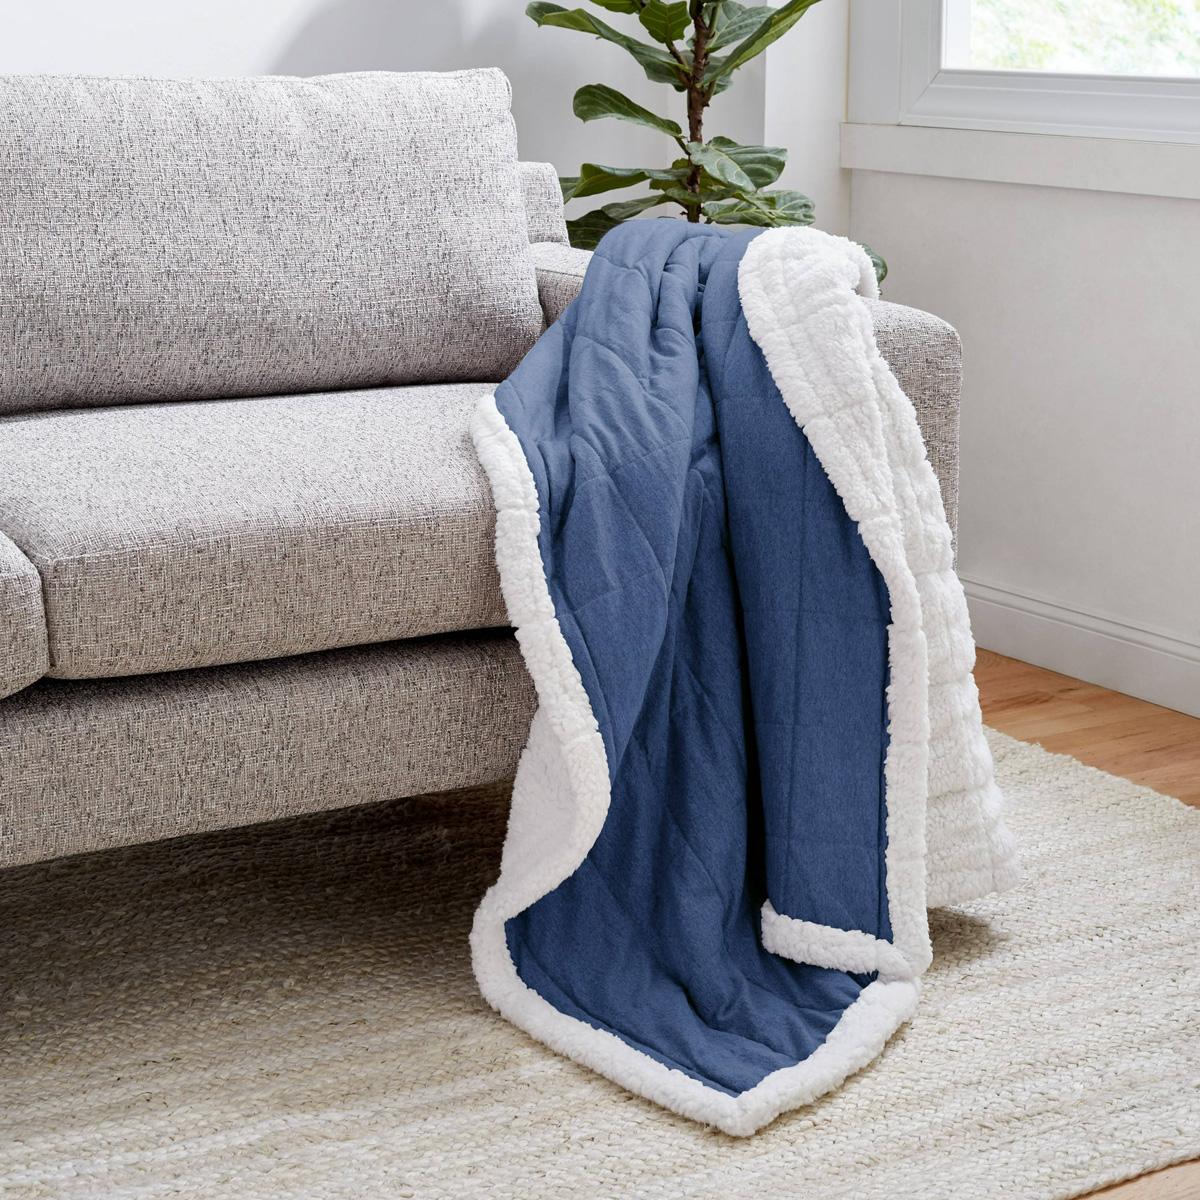 Gap Home Quilted Jersey Reversible Sherpa Throw Blanket for $12.88